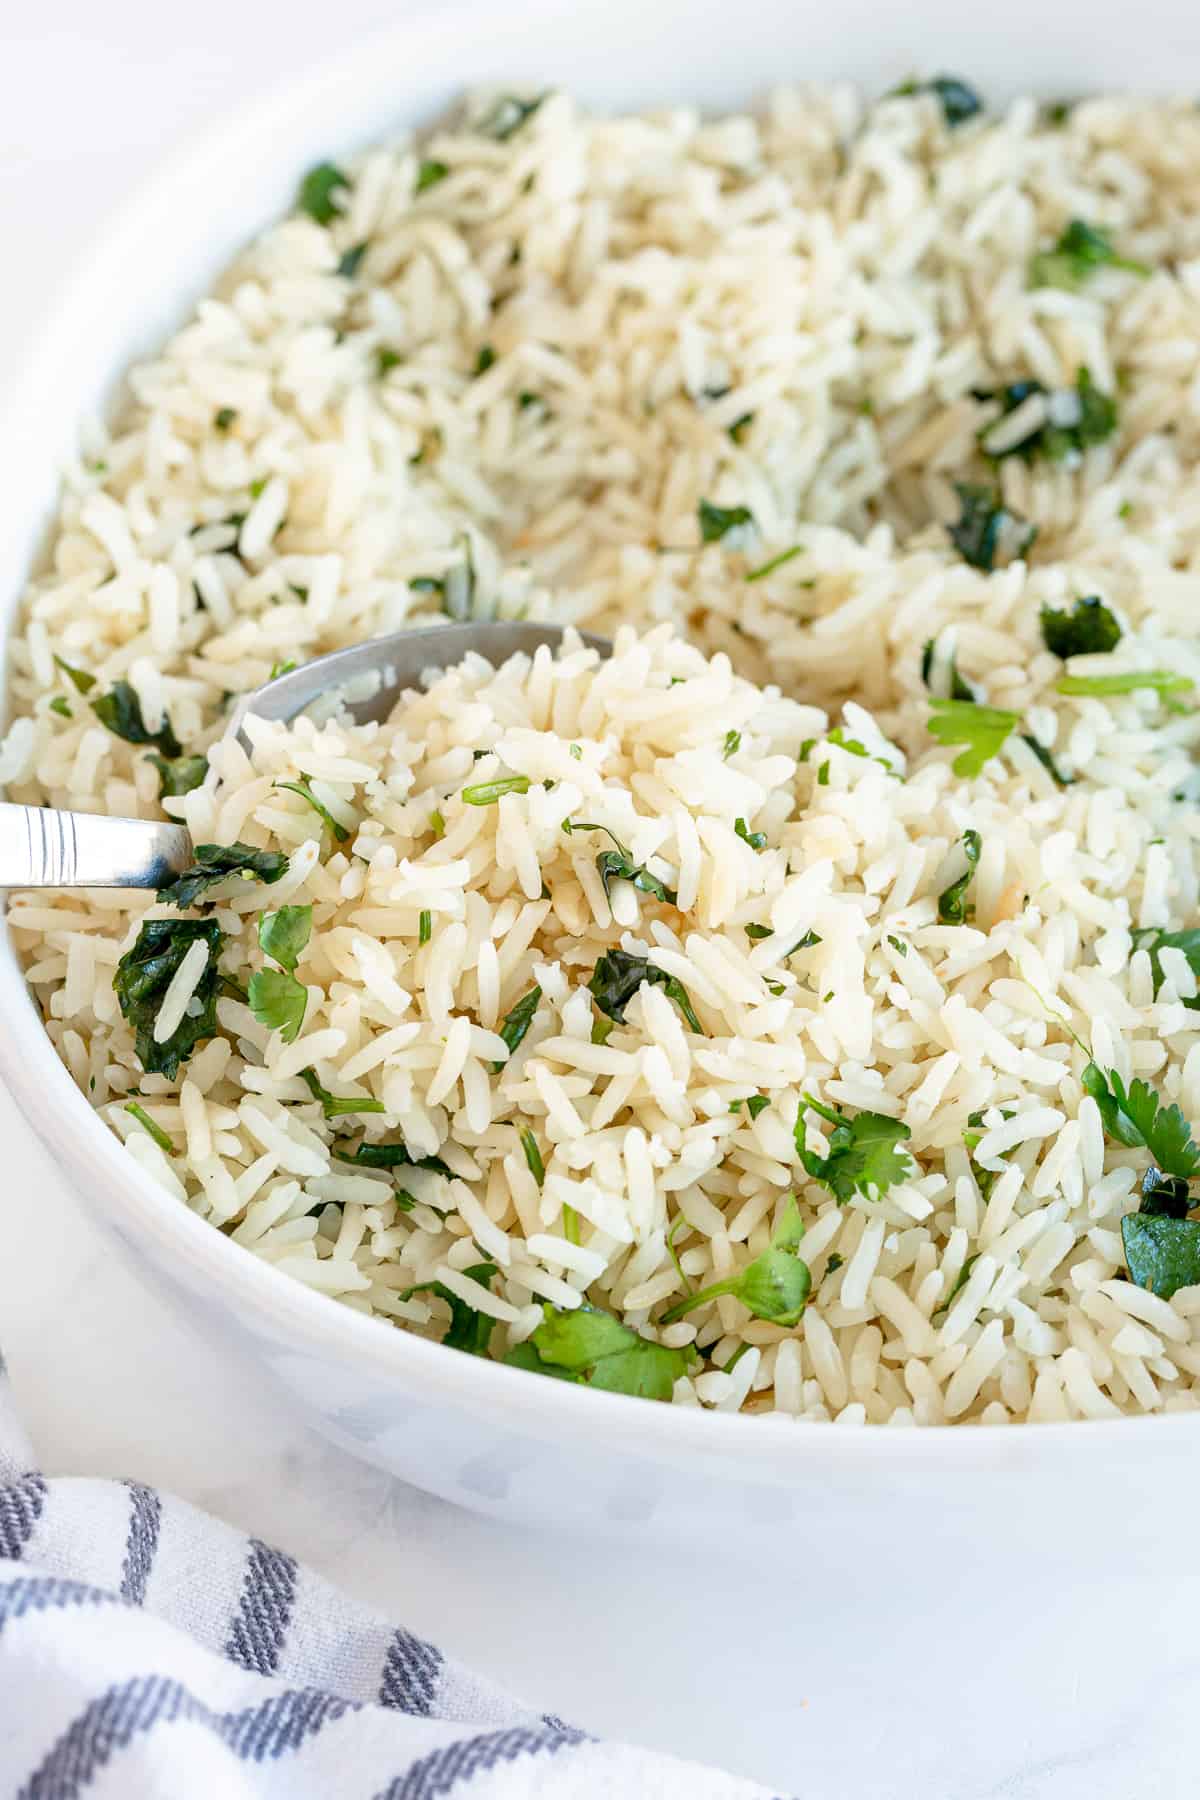 A spoon scoops Cilantro Lime Rice from a white serving bowl.